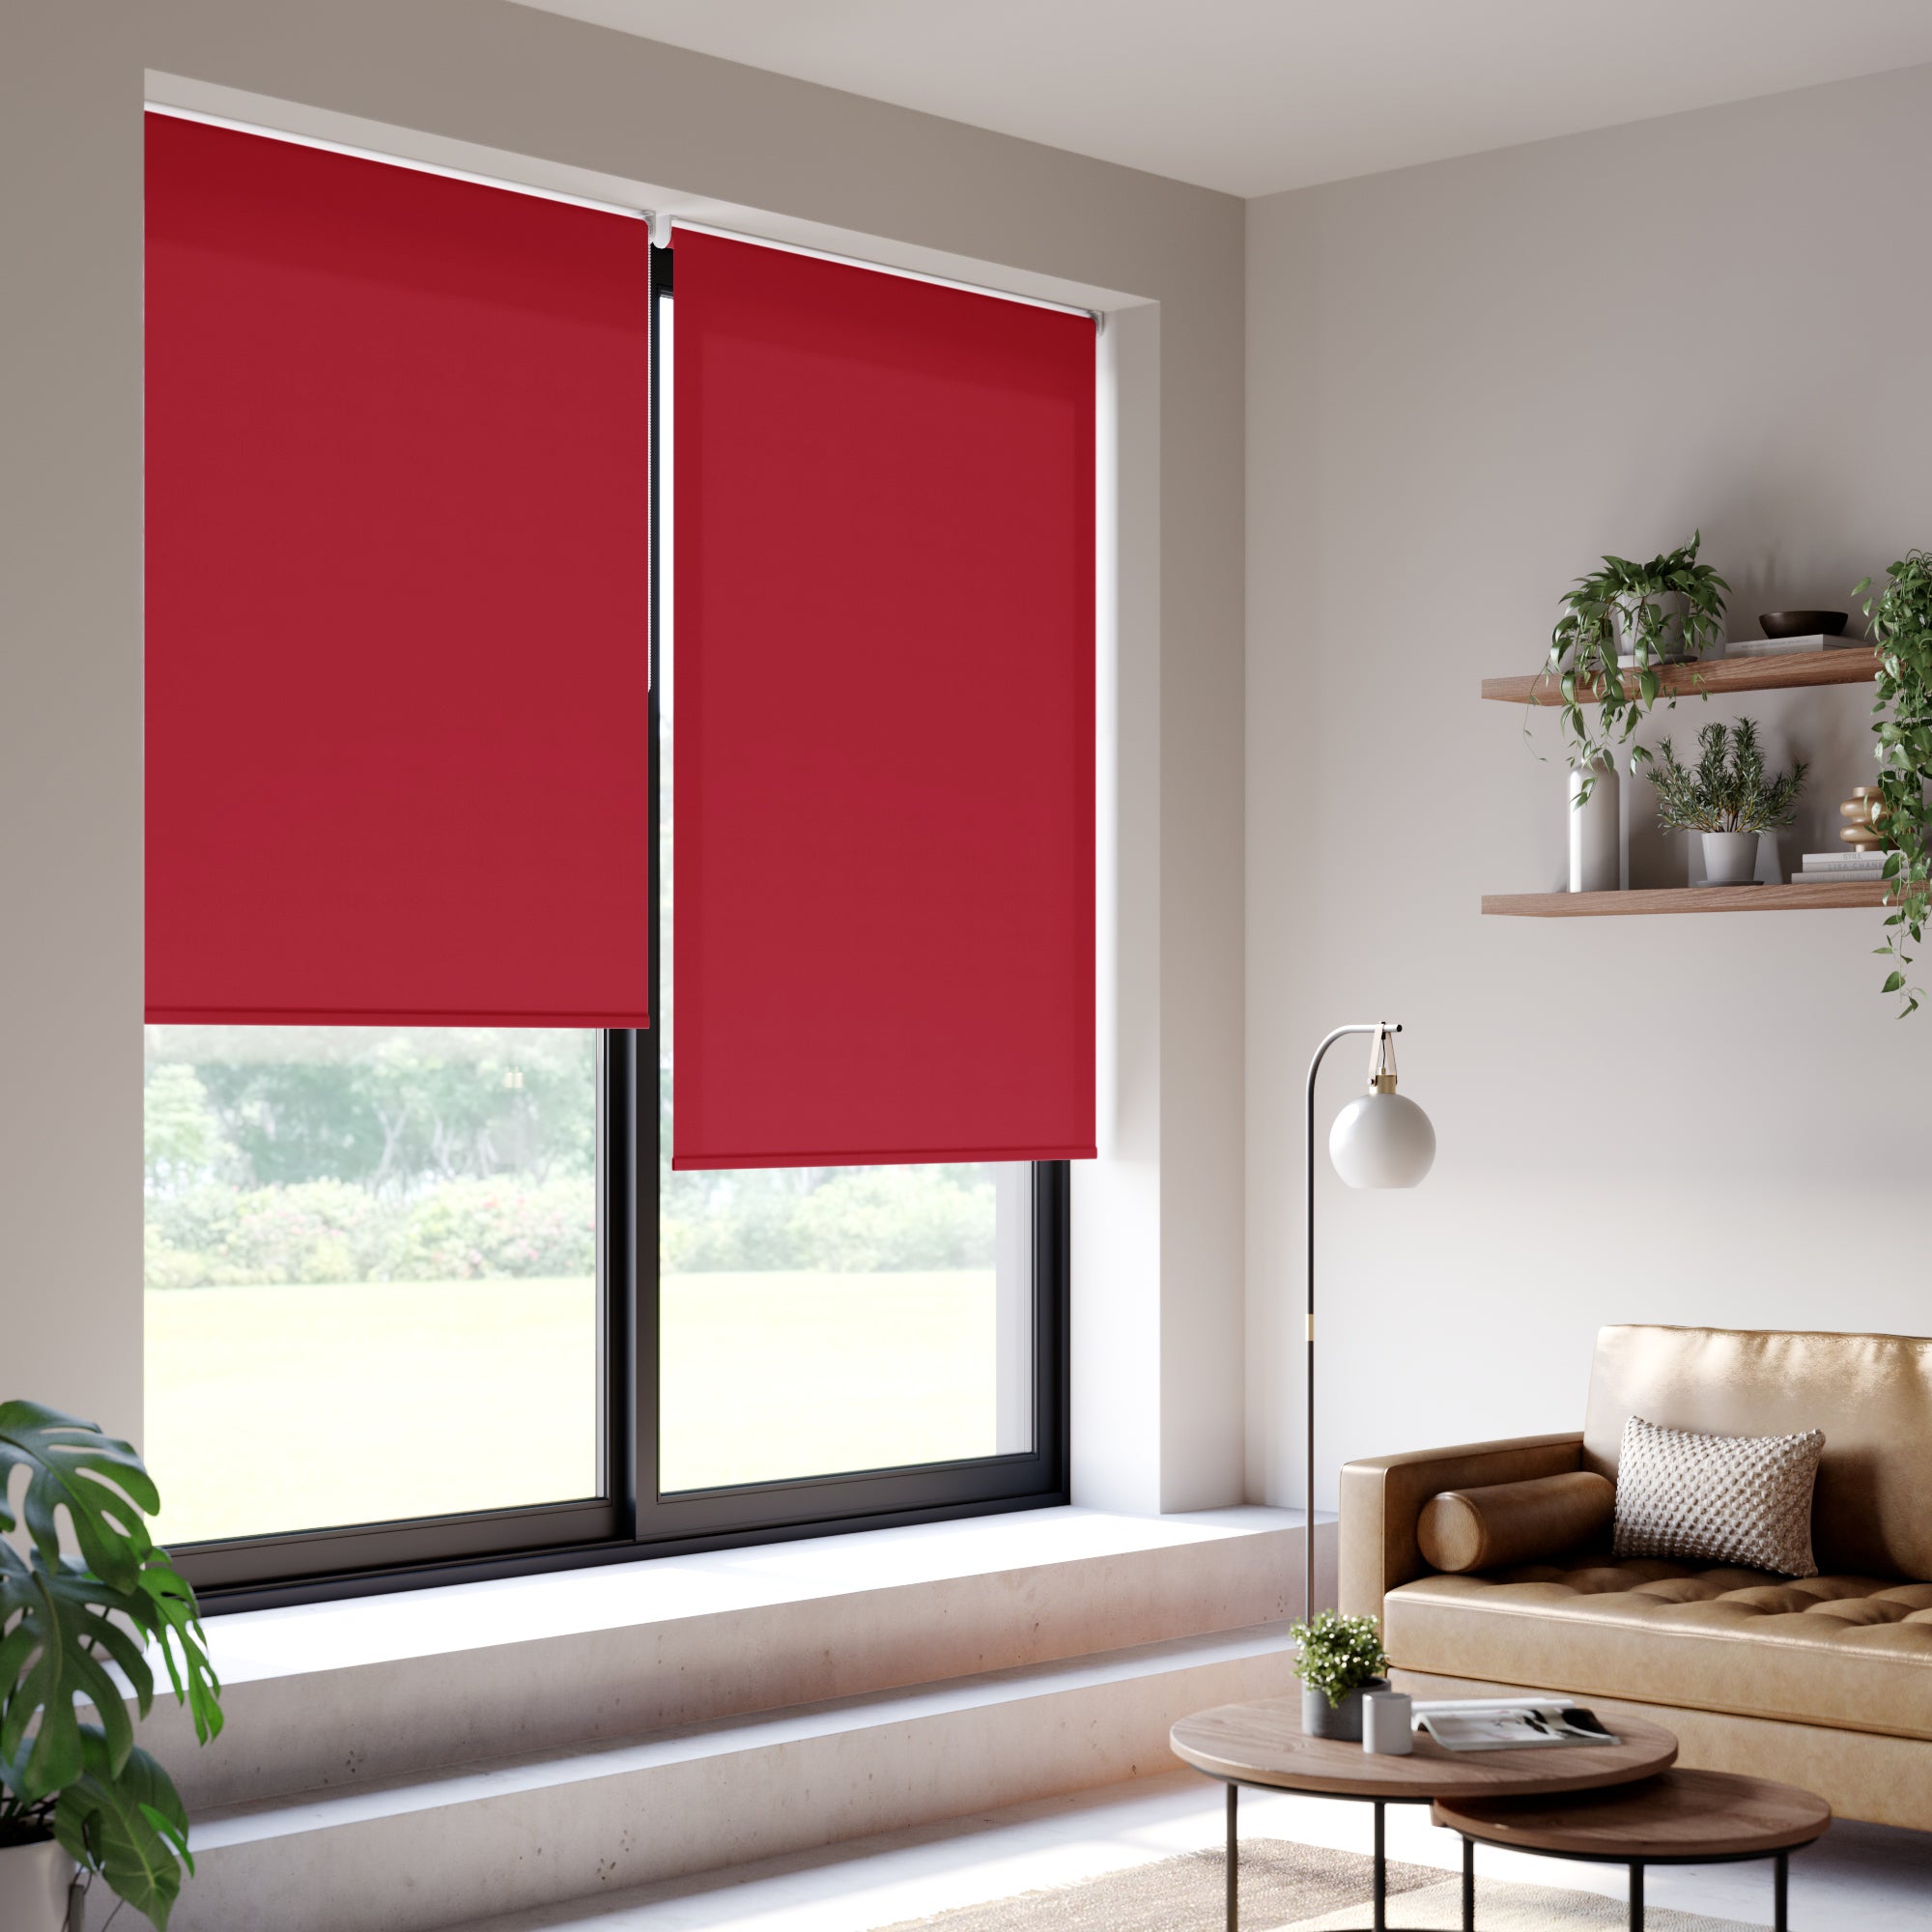 Iona Daylight Made to Measure Flame Retardant Roller Blind Iona Scarlet